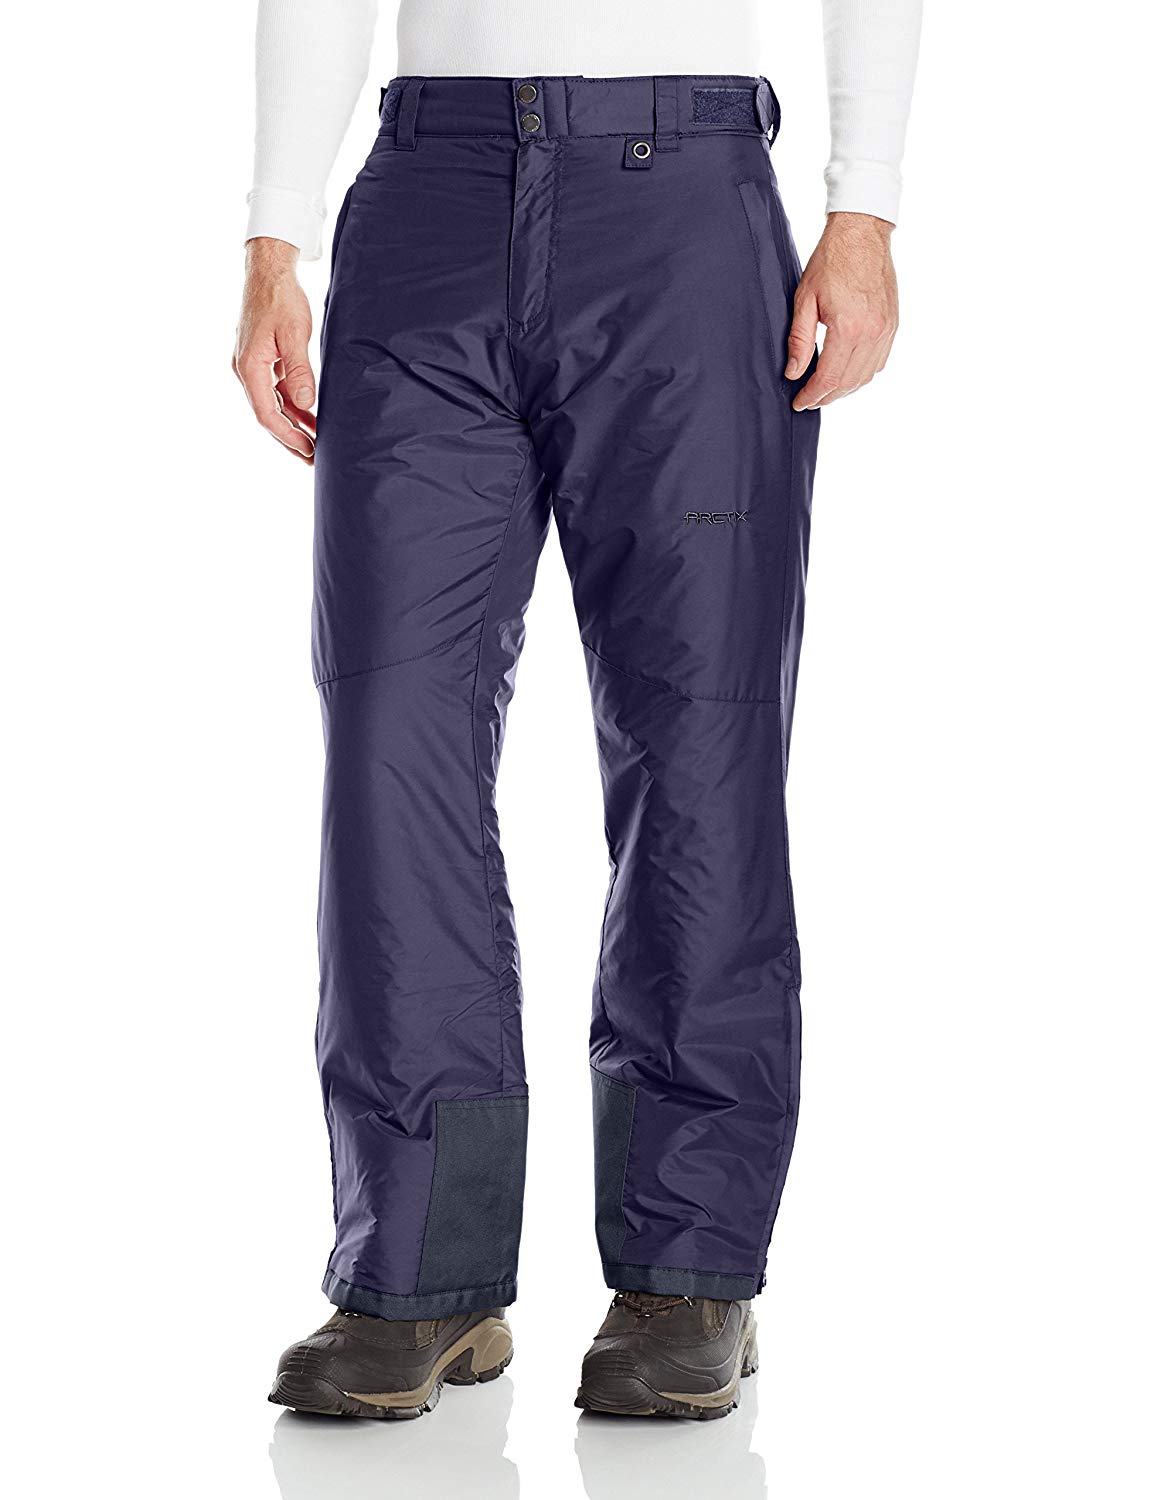 Insulated Pants for Winter 